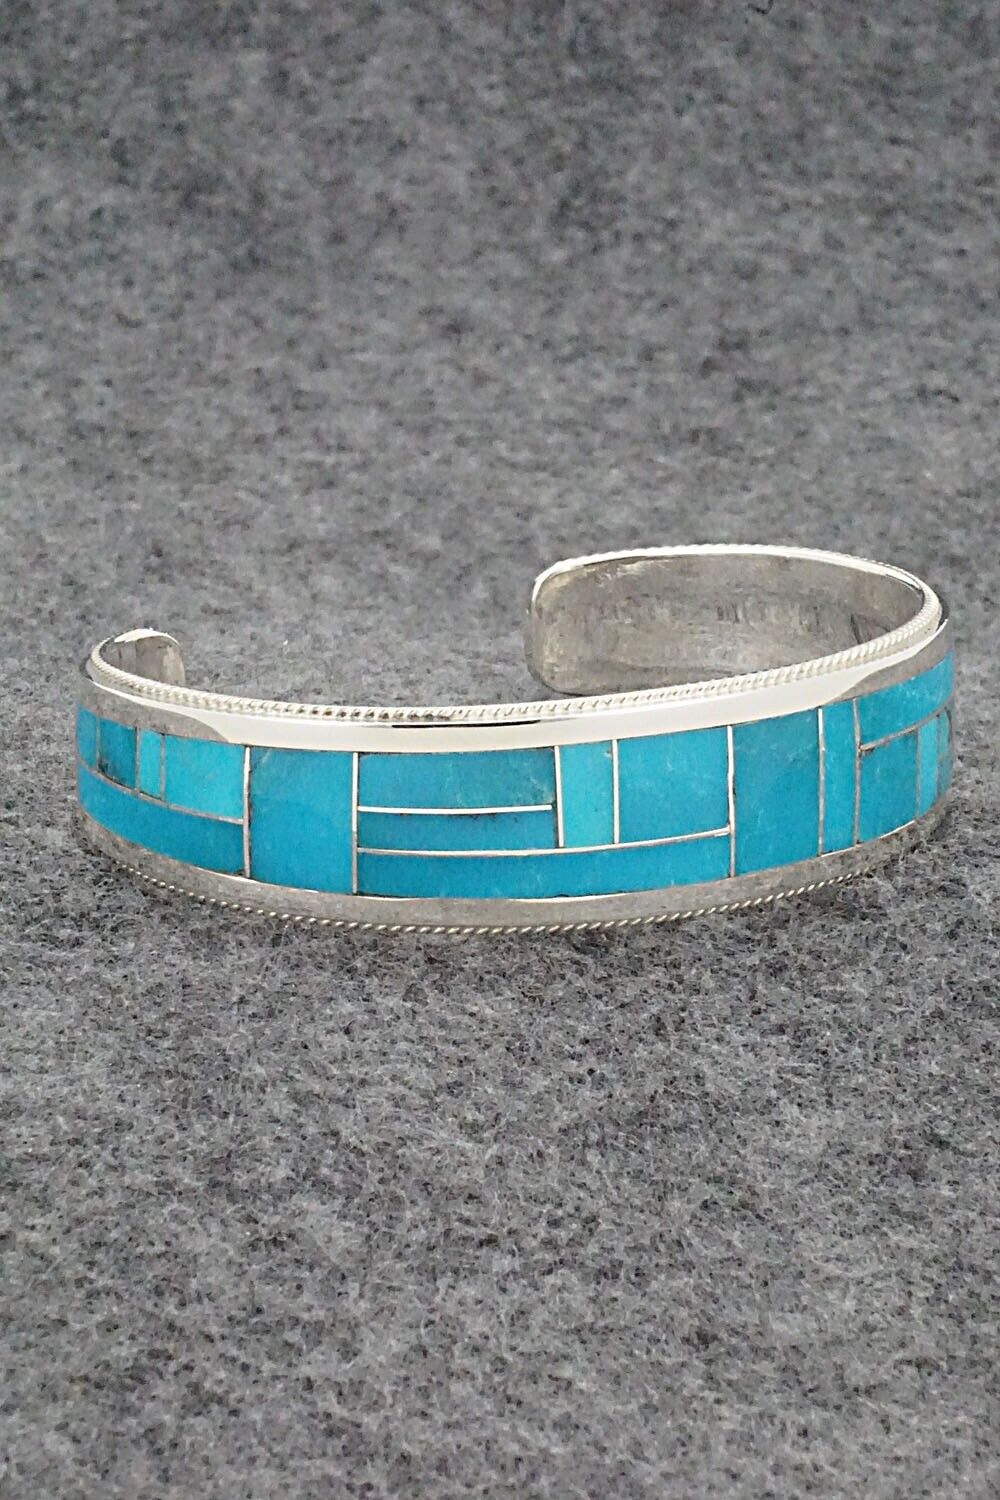 Turquoise & Sterling Silver Inlay Bracelet - Rickel Booqua